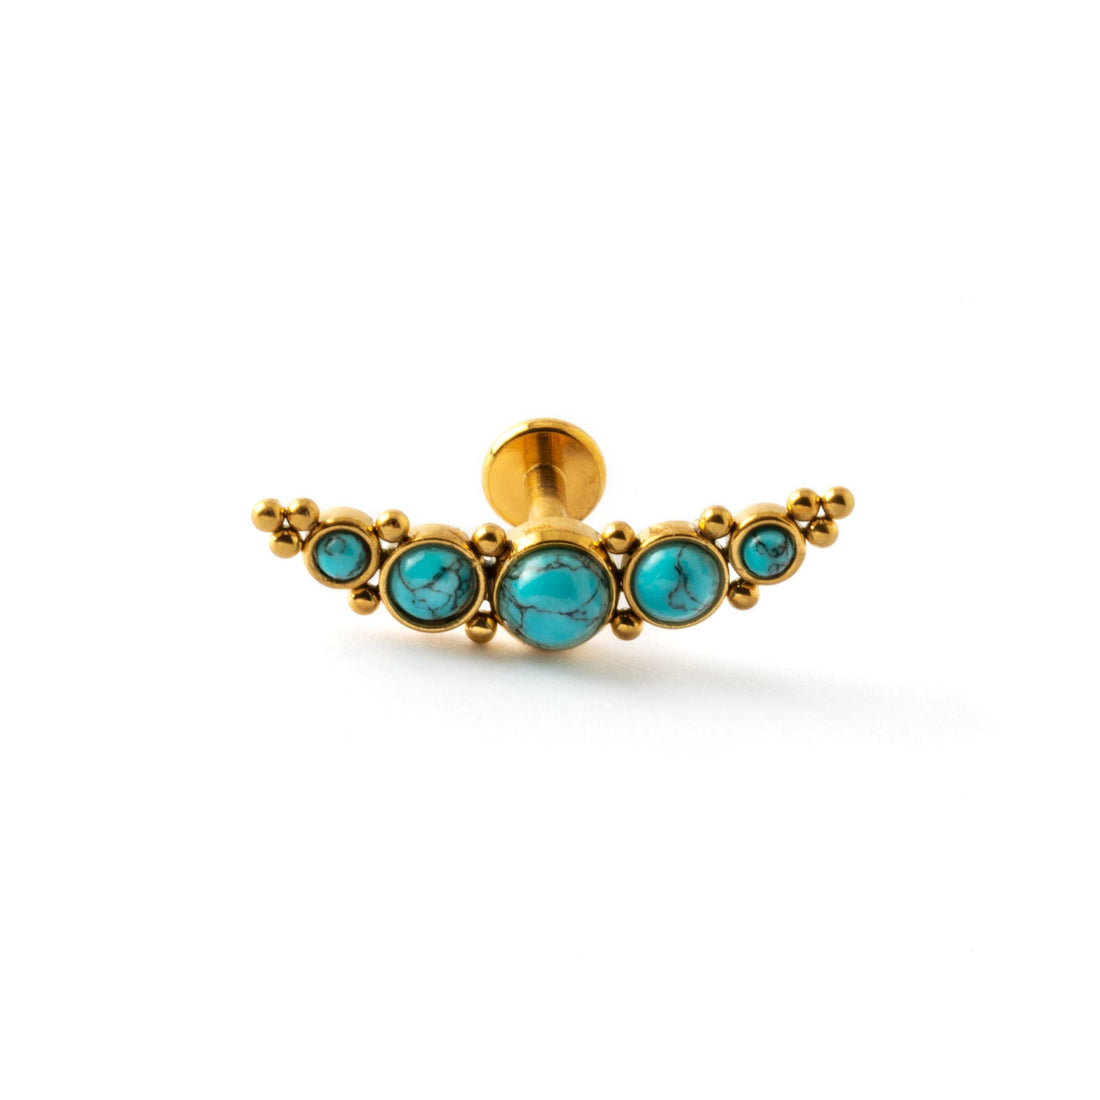 Deva golden labret with Turquoise frontal view